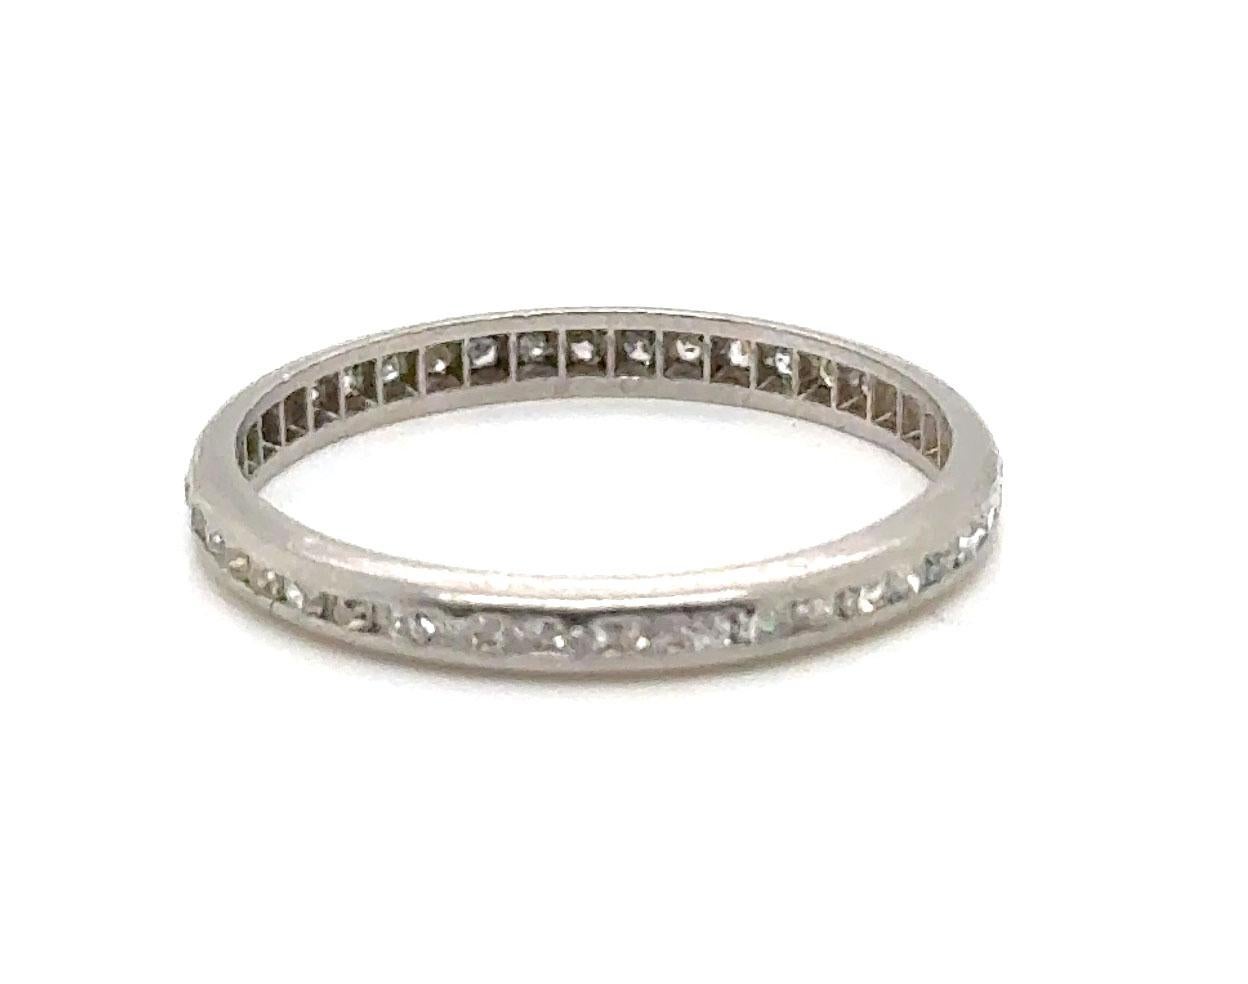 Genuine Original Antique Art Deco Dated 12-13-35 Anniversary Band .75ct Single Cuts Diamond Platinum Ring 



Stunning Piece Featuring Matching Clean and Colorless Natural Mined Single Cuts, each Contributing to the Overall Brilliance of this